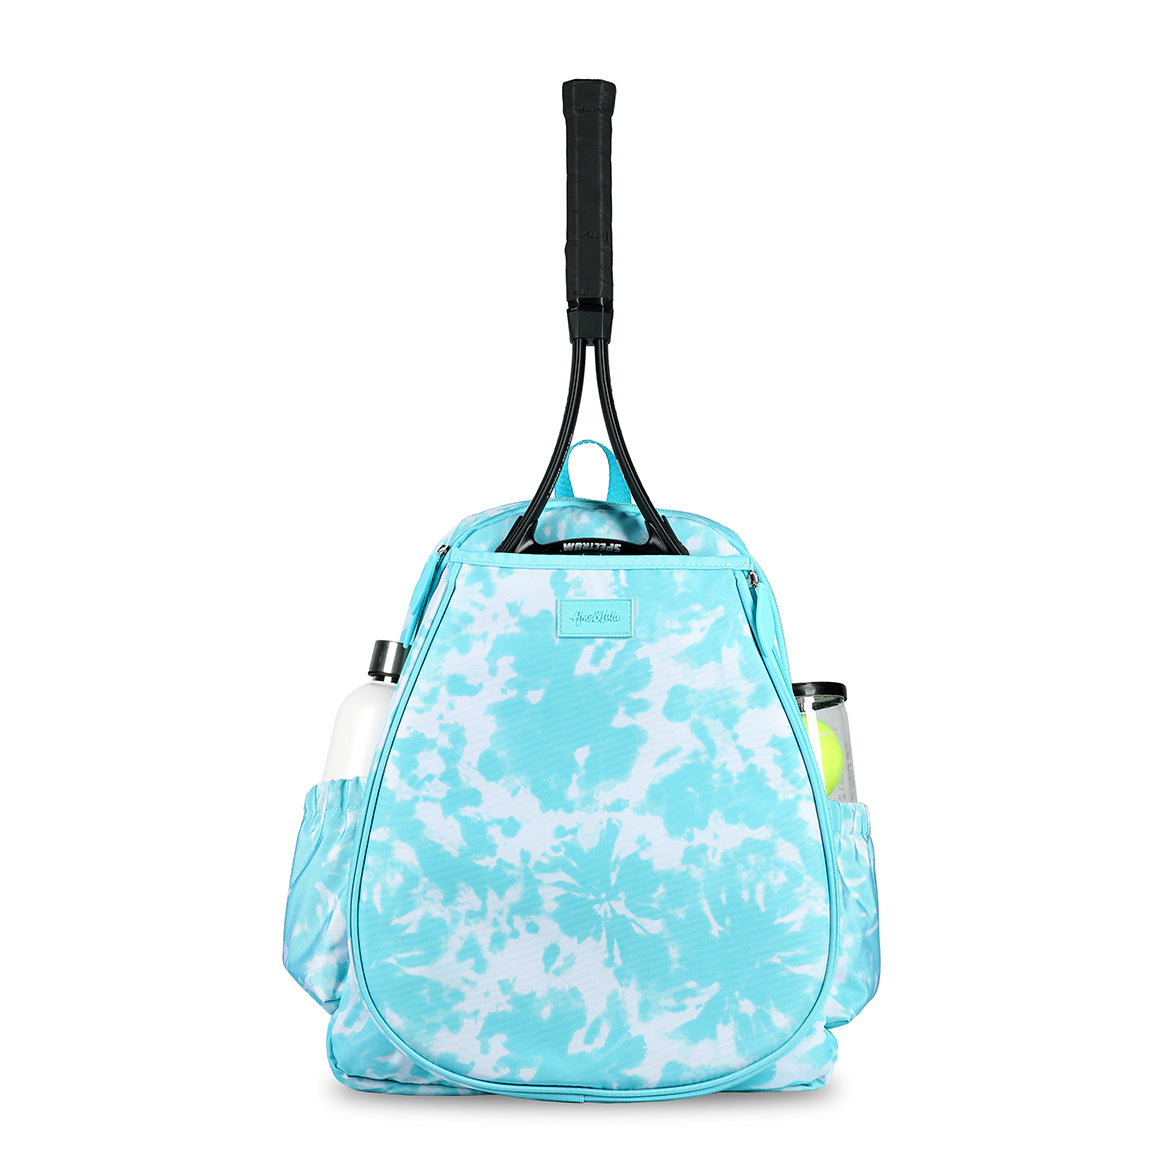 Front view of aqua blue tie dye pattern game on tennis backpack. Tennis backpack has water bottle and tennis balls in side pockets.